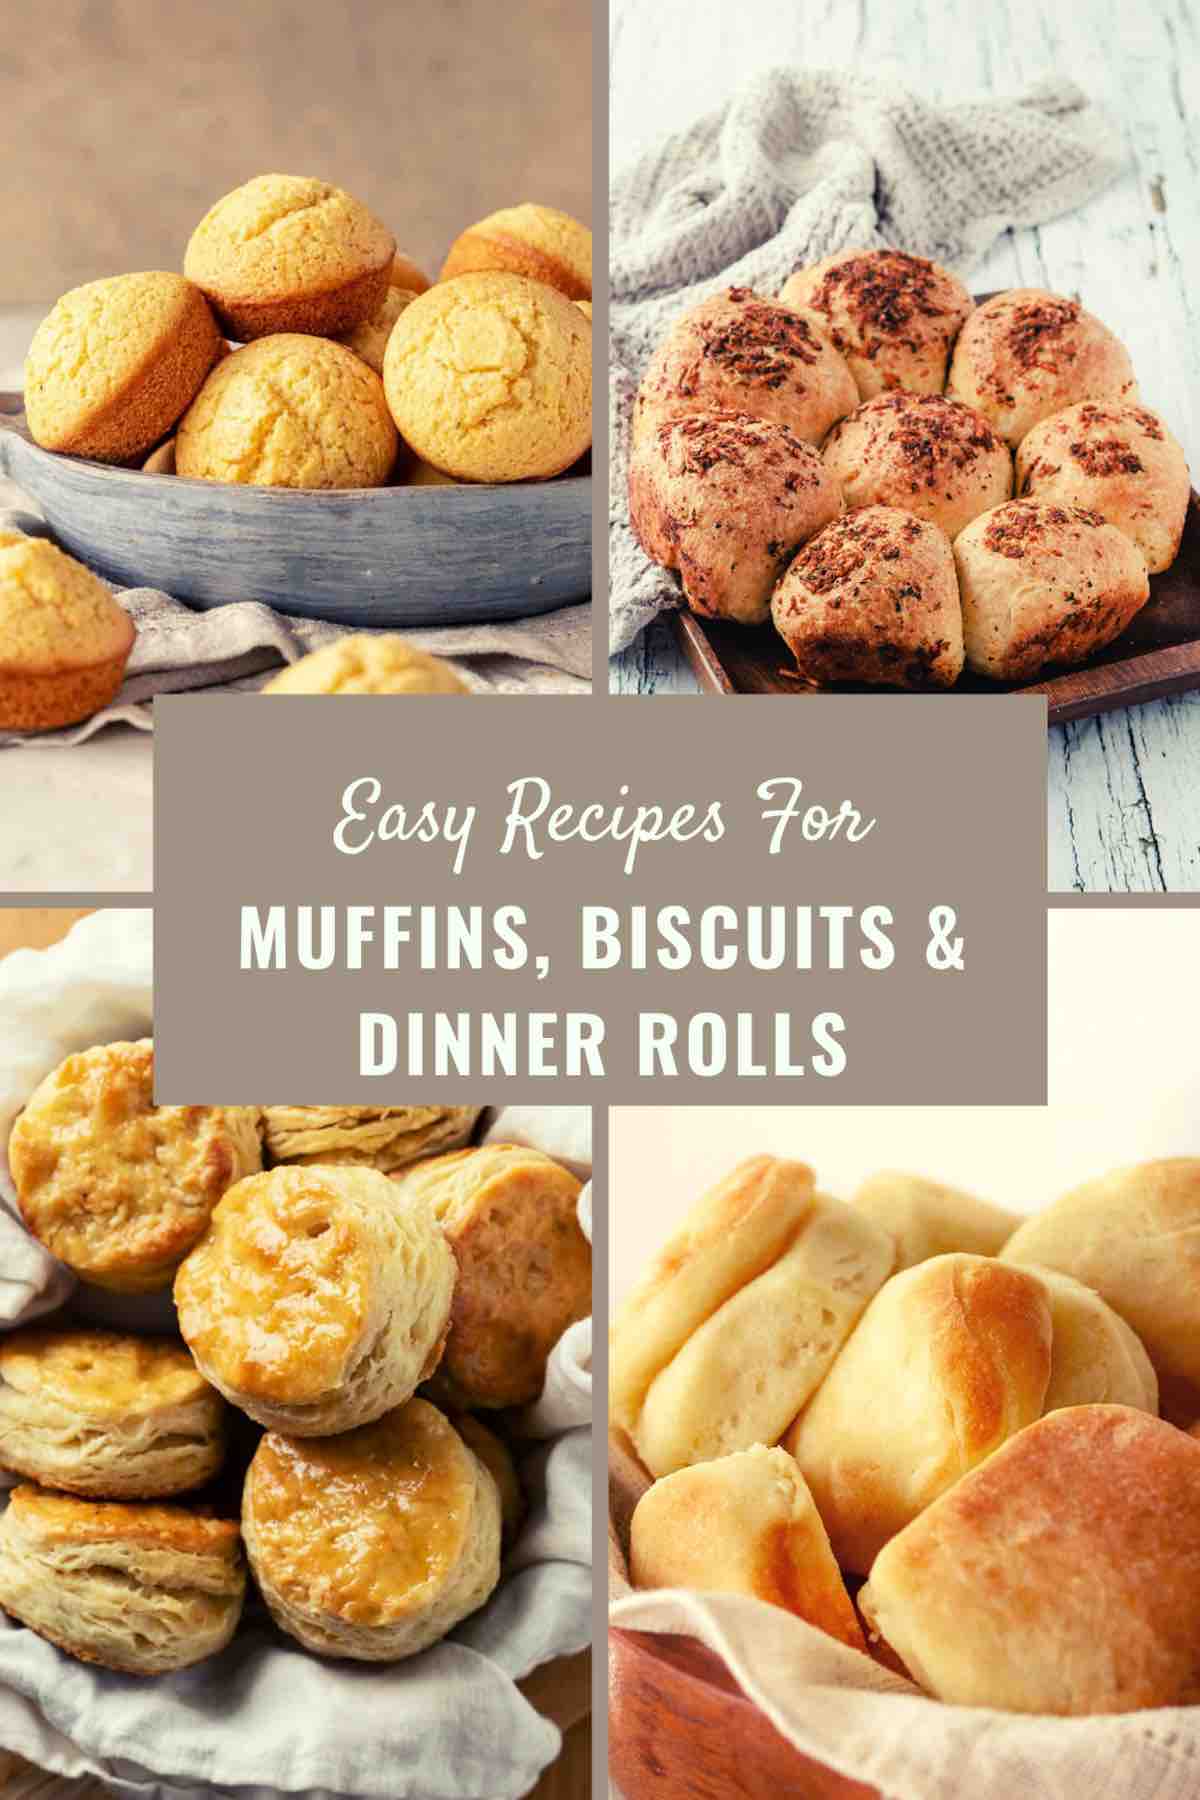 A collection of muffins, biscuits and dinner rolls to serve during Friendsgiving dinner.